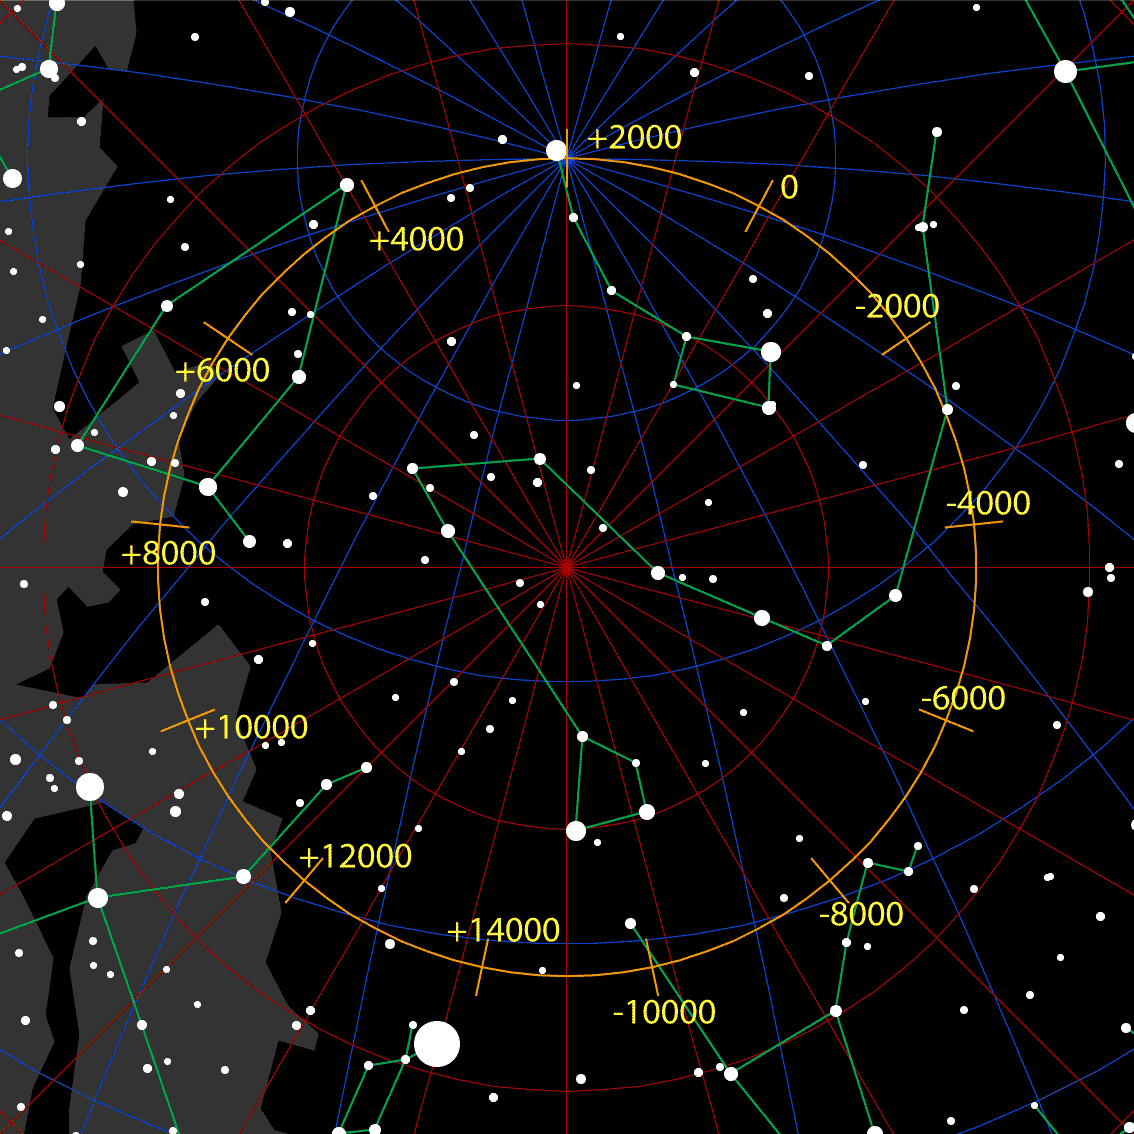 A diagram displaying the positions of constellations based on a celestial calendar.